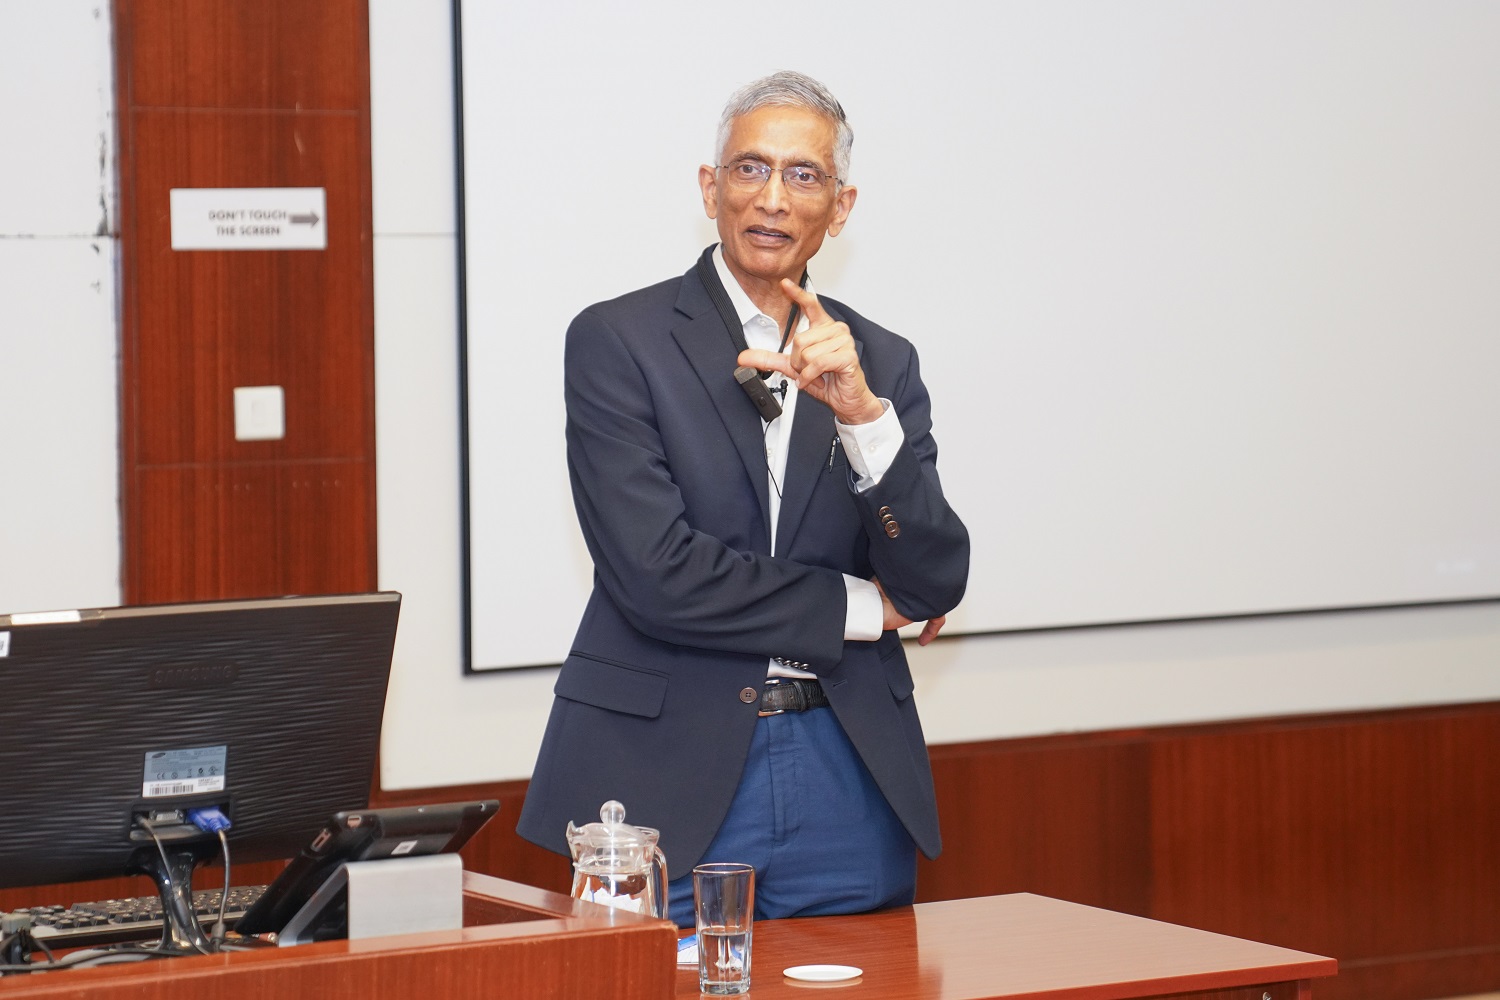 Shri Parameswaran Iyer, Former Secretary, Ministry of Drinking Water and Sanitation, Government of India, speaks on, ‘Designing and Implementing Large Scale Development Programmes’, at an event hosted by the Jal Jeevan Mission at IIM Bangalore, on 7th February 2024.